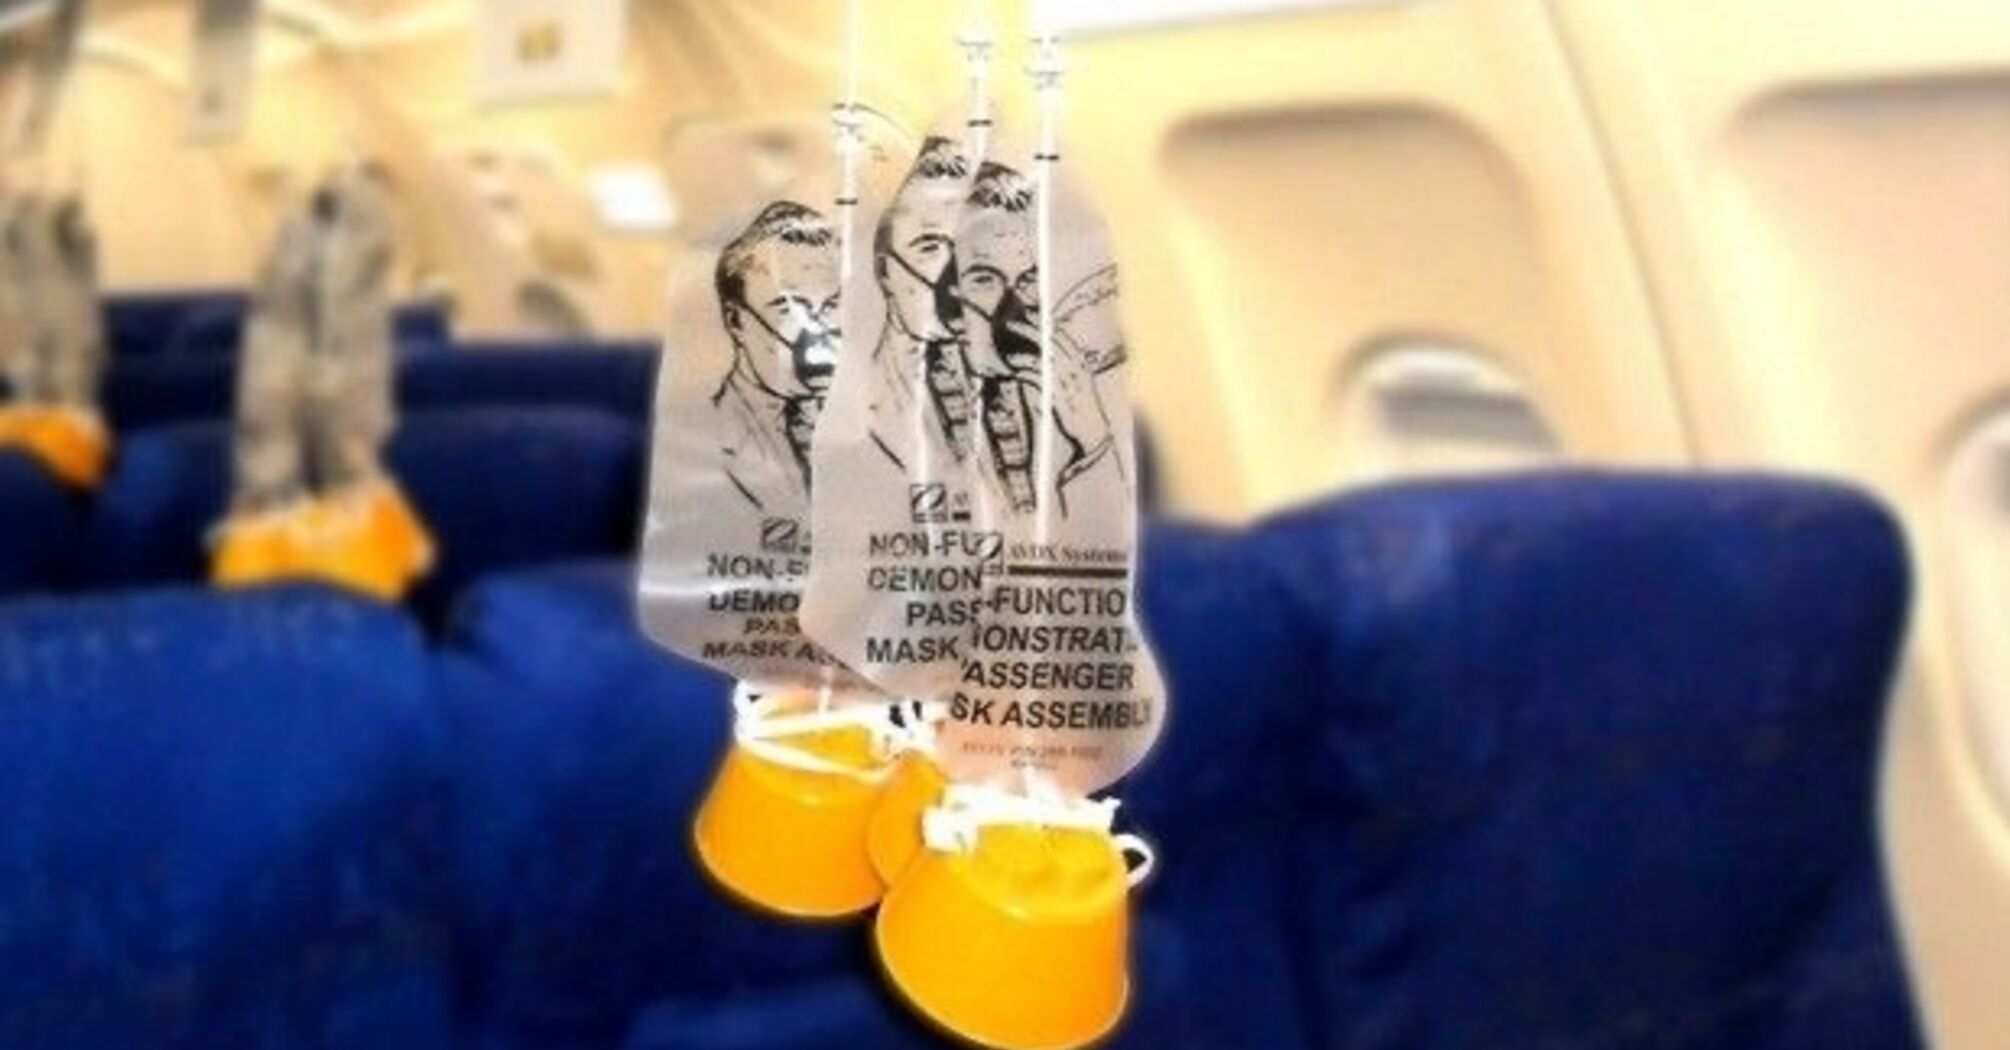 Flight safety: What happens if your oxygen mask doesn't inflate?